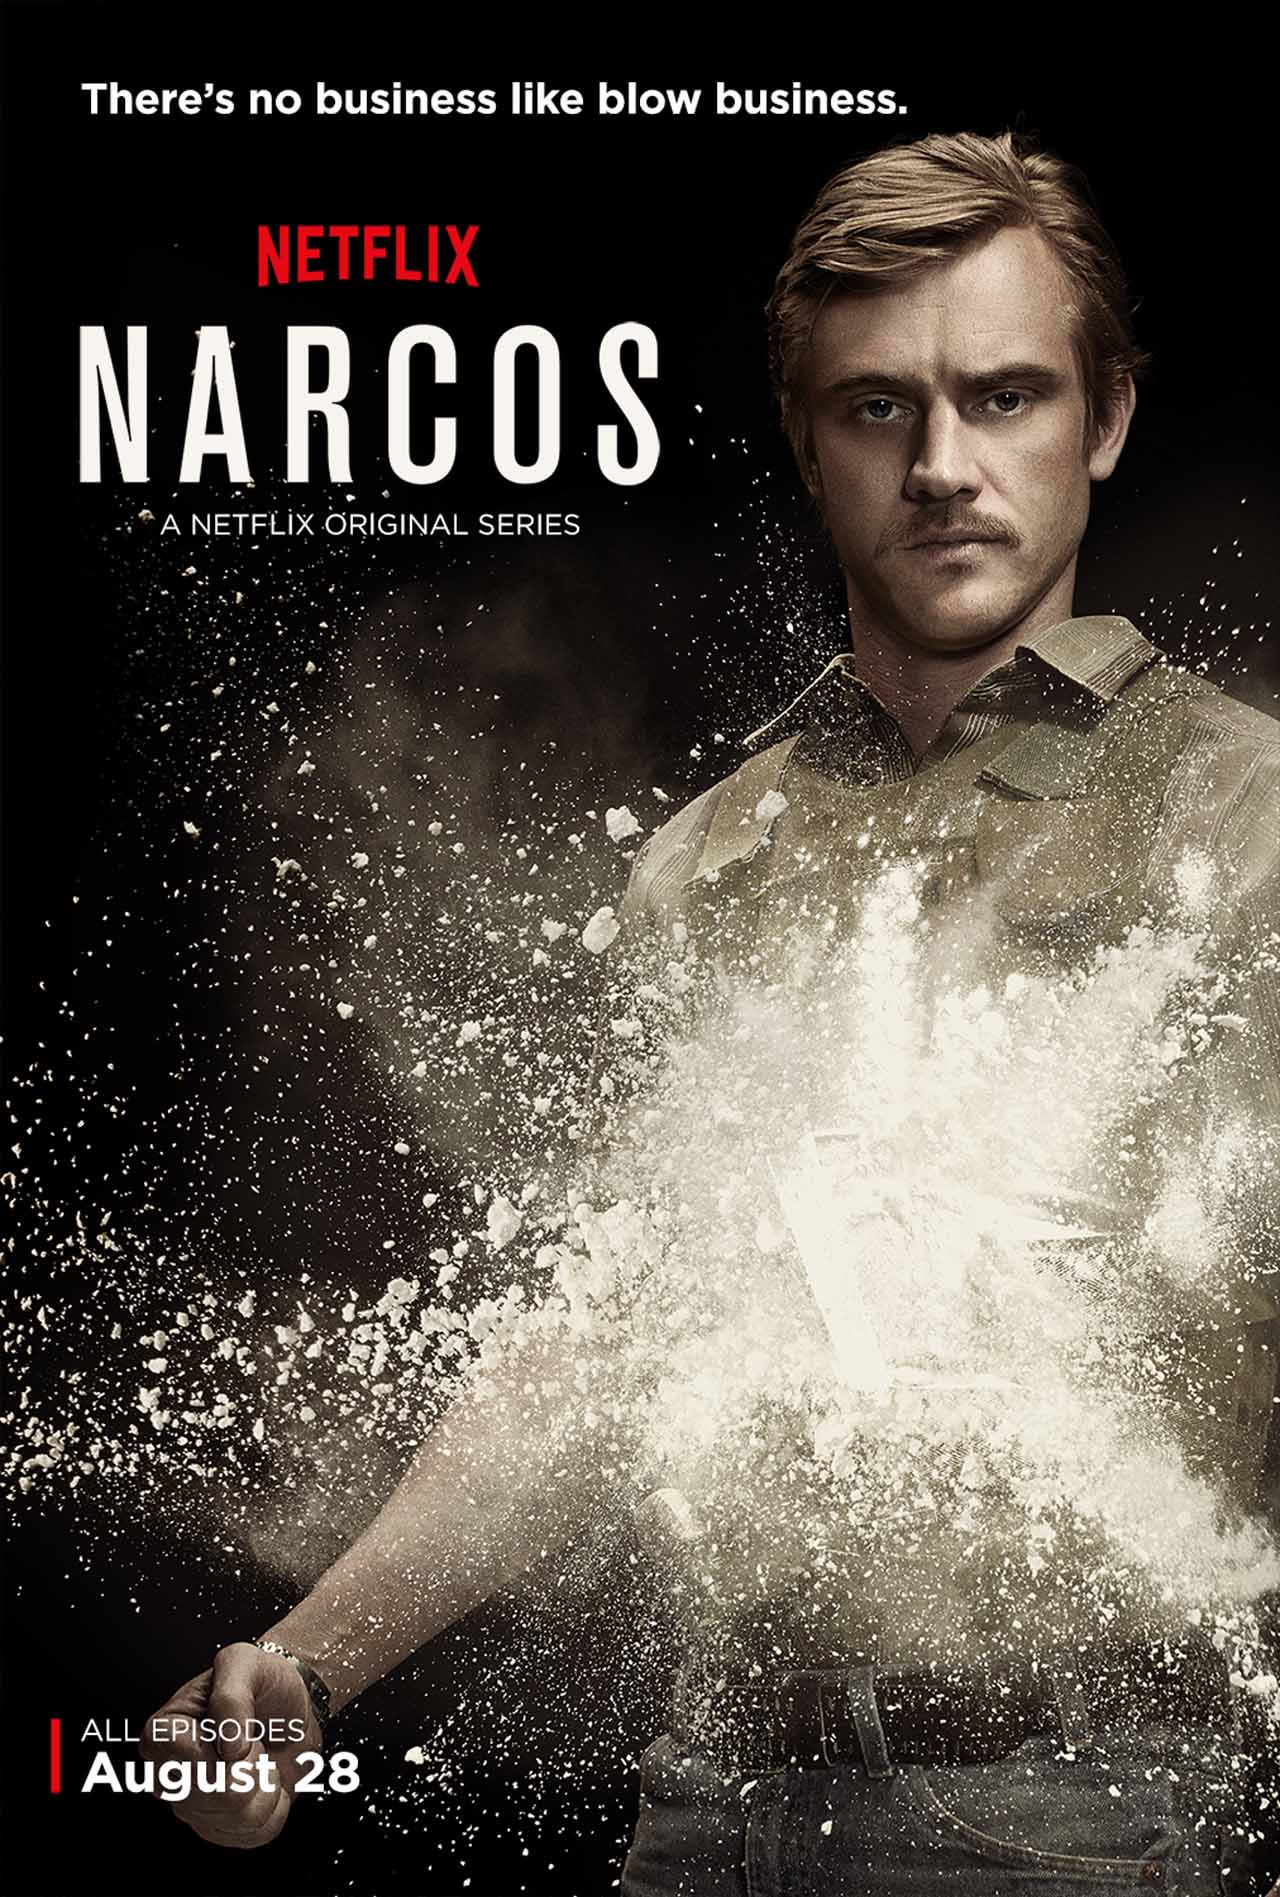 narcos tapete,film,album cover,poster,actionfilm,schriftart